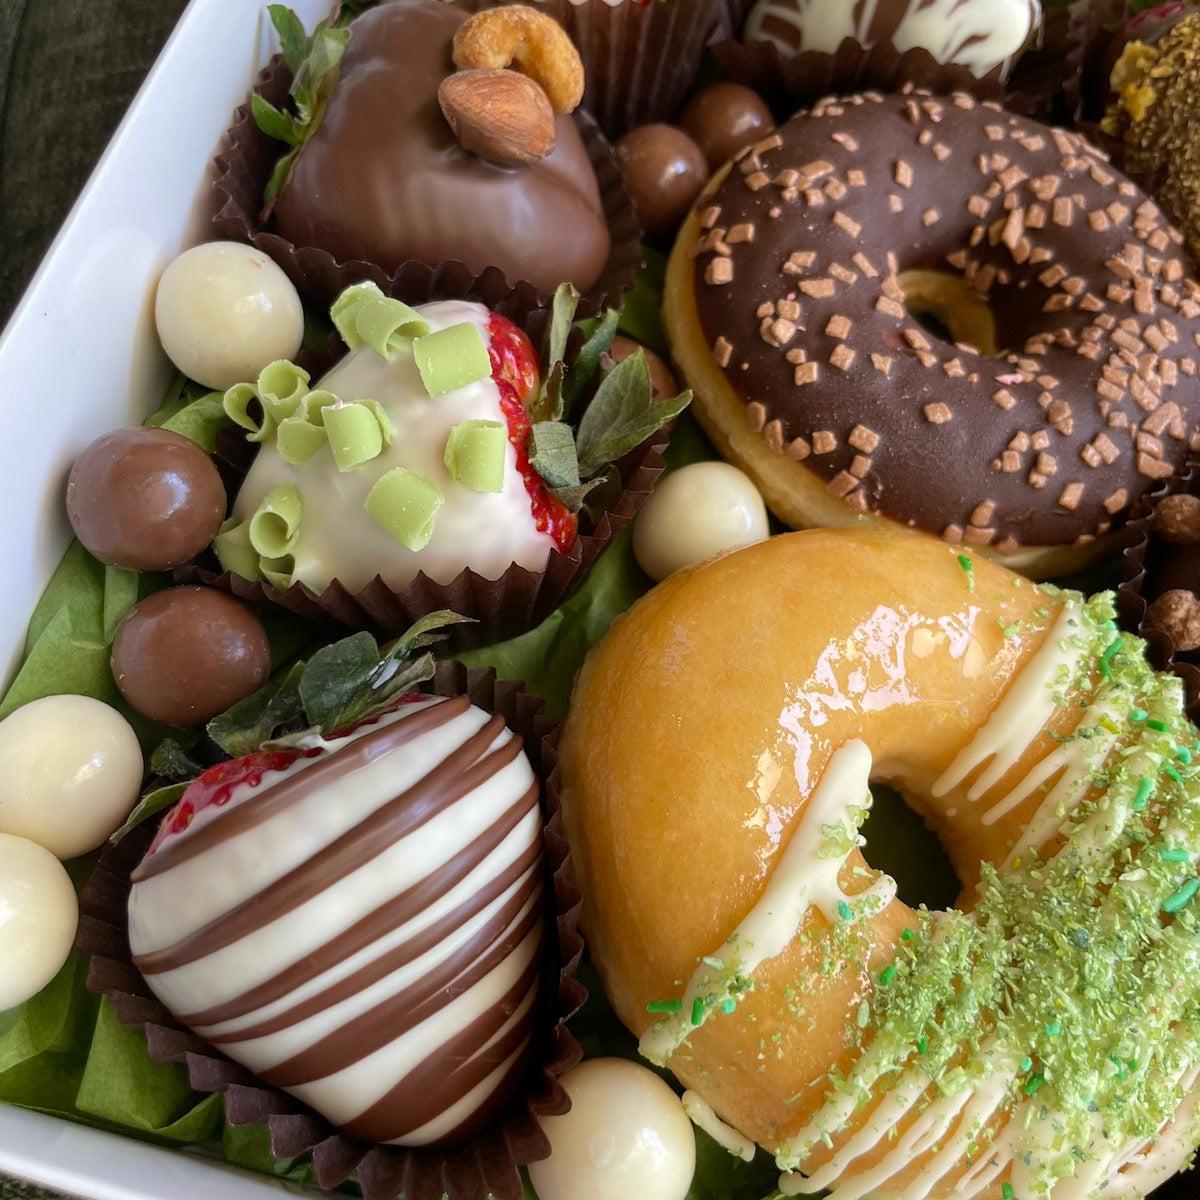 Delight in heavenly donuts & chocolate-covered strawberries. Perfect for any occasion!